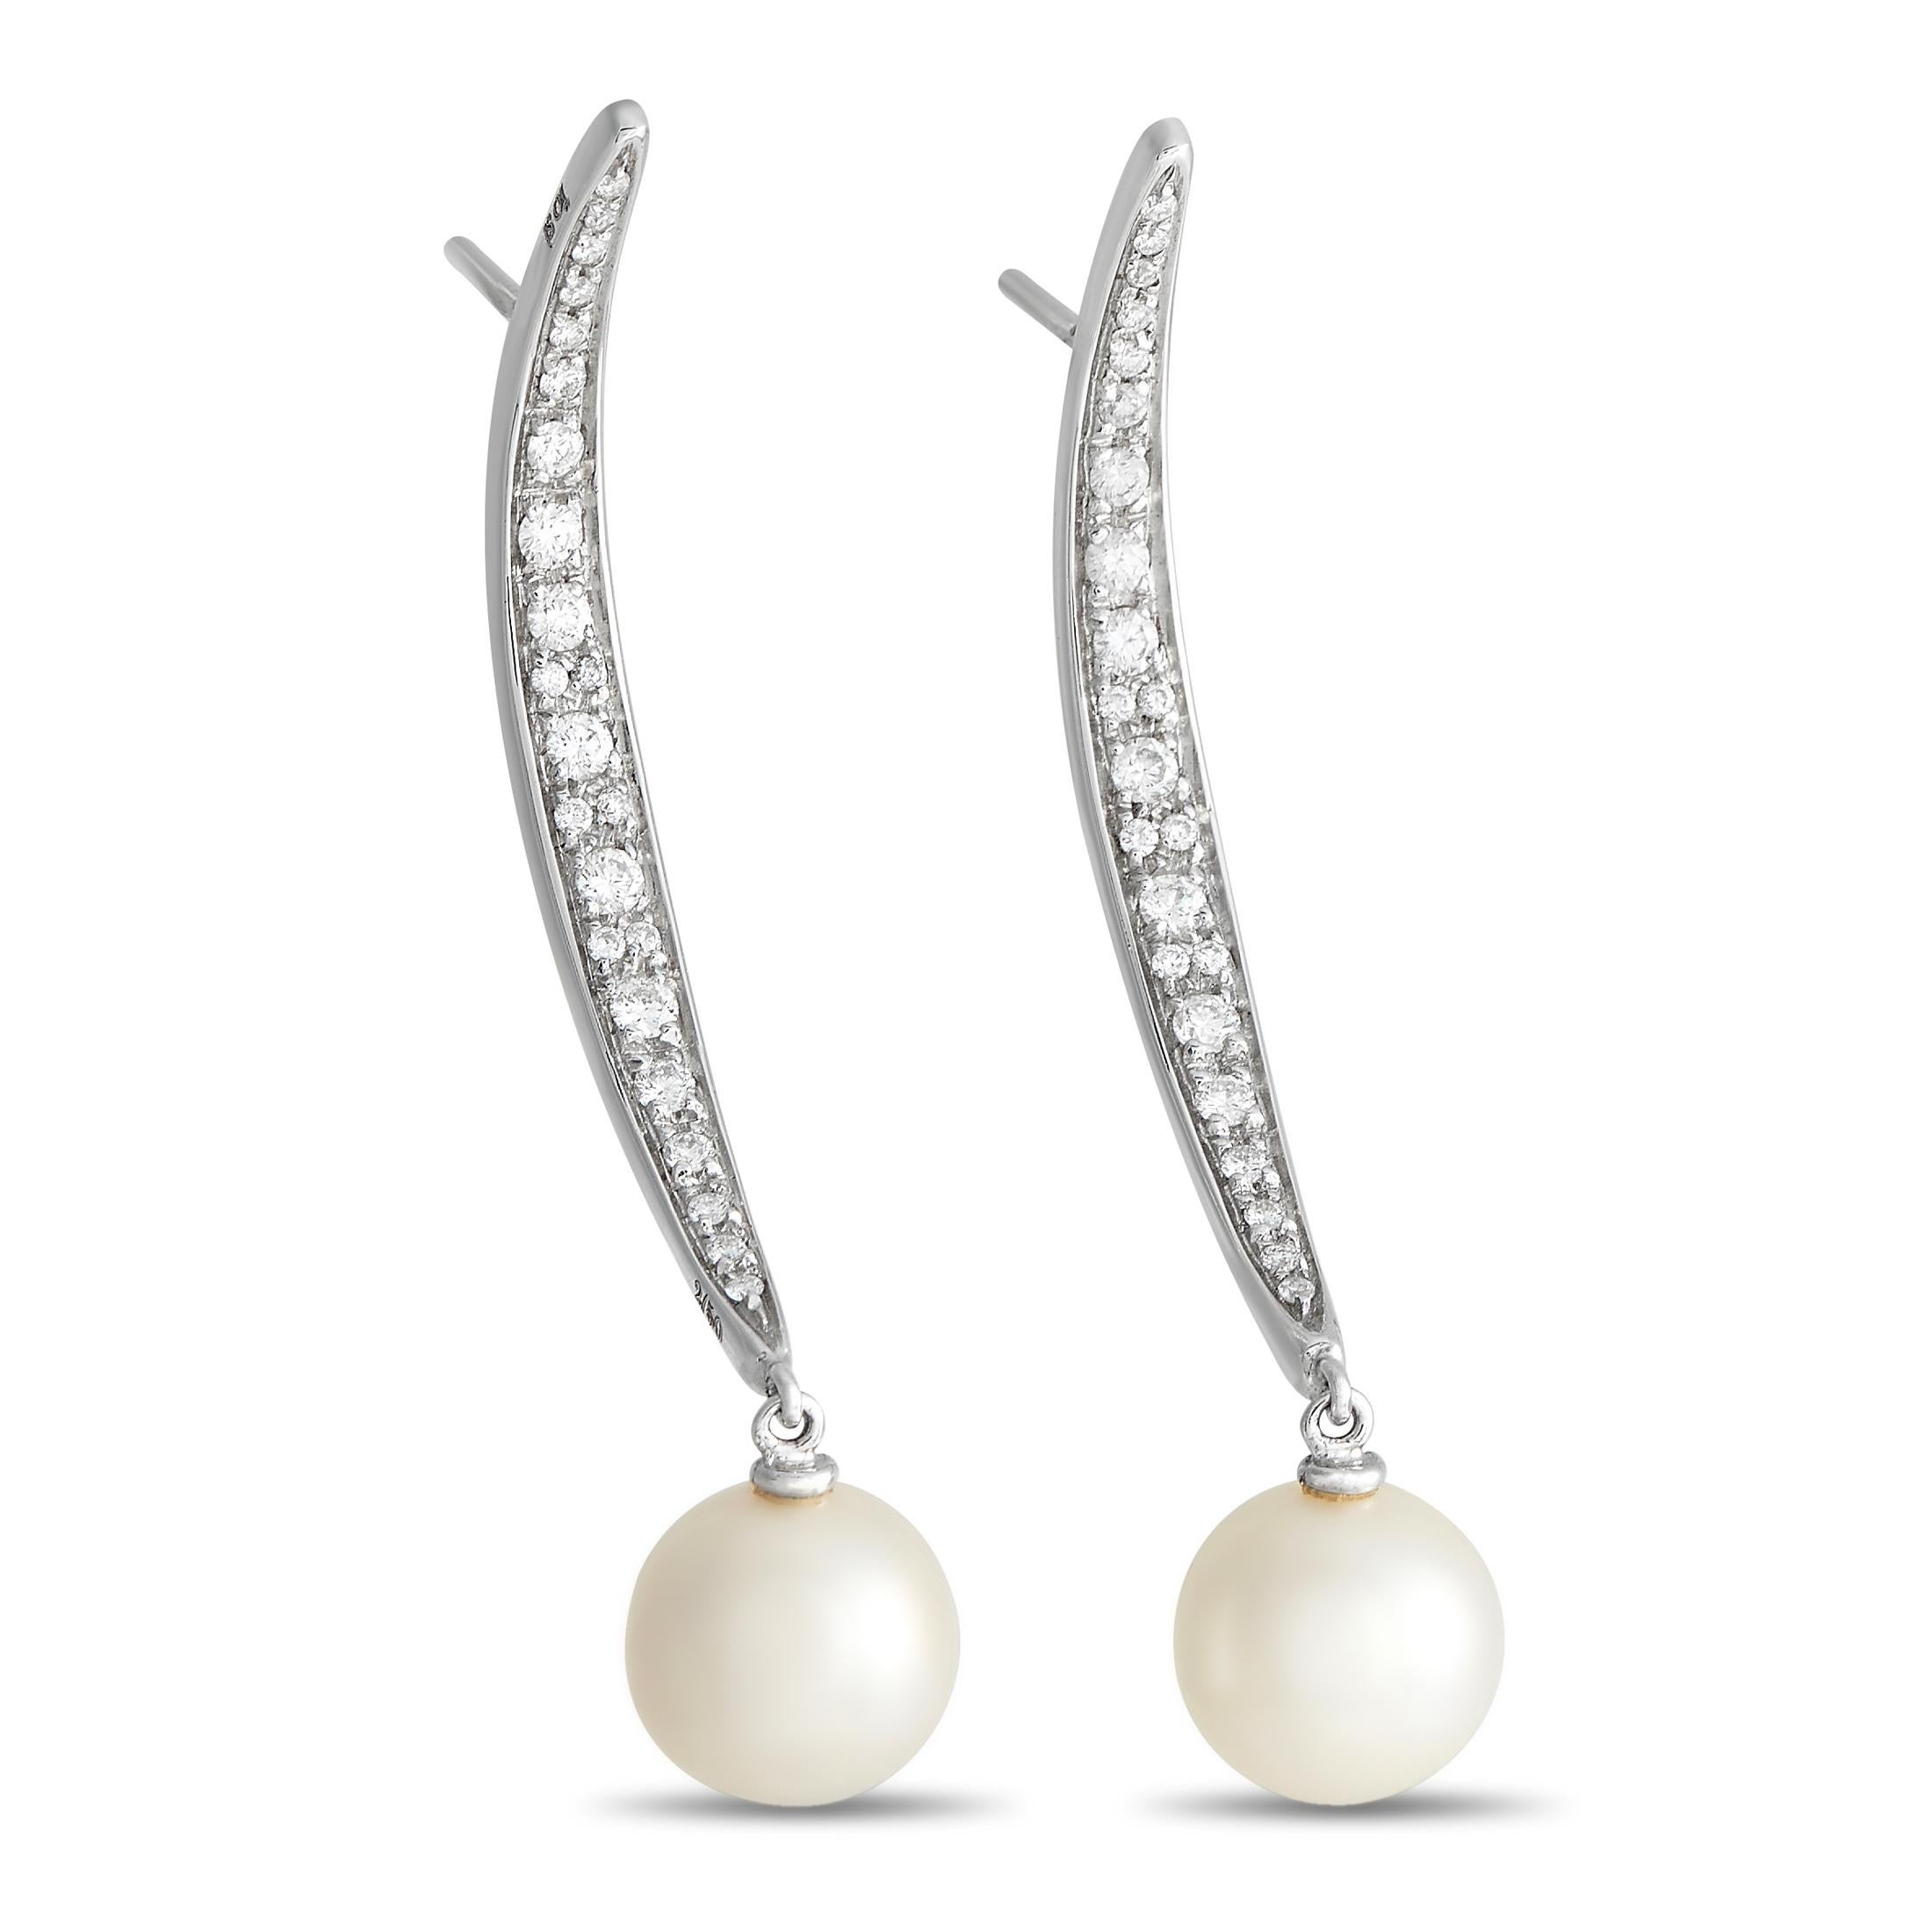 Truly a product of imagination, this pair of diamond and pearl earrings from Italian jewelry brand Io Si impresses with its avant-garde styling. The earrings are concave C-hoops where the diamond-traced C-shaped curve is turned inwards. A lustrous